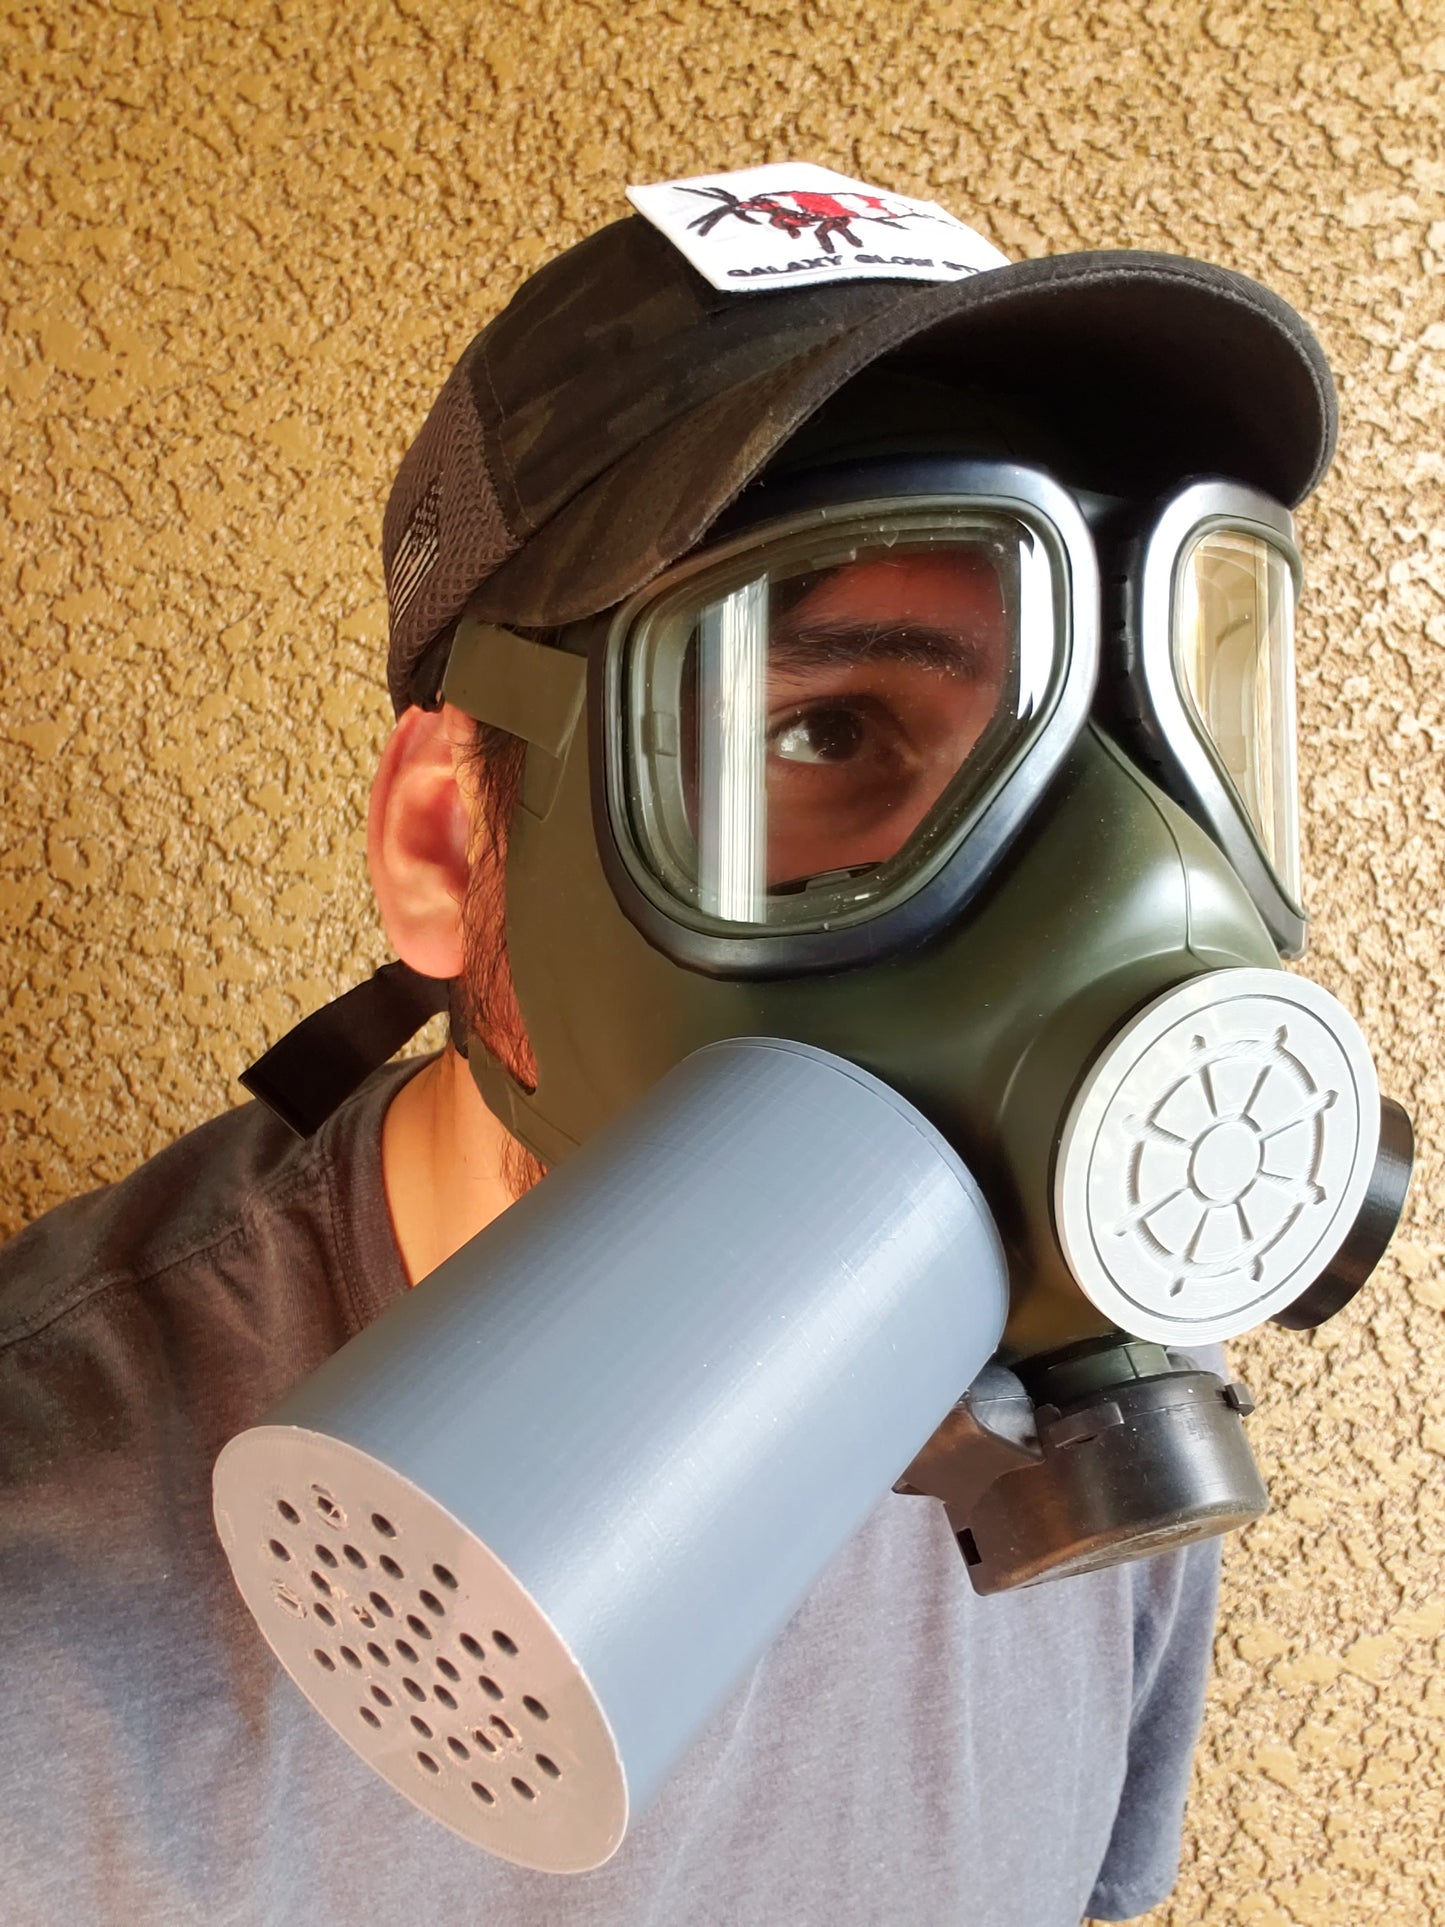 Long Canister filter for 40mm NATO gas masks - 3D Printed ABS Plastic (canister only) - 3M 2200 mpr (merv13) filter media - m40/42 gas mask